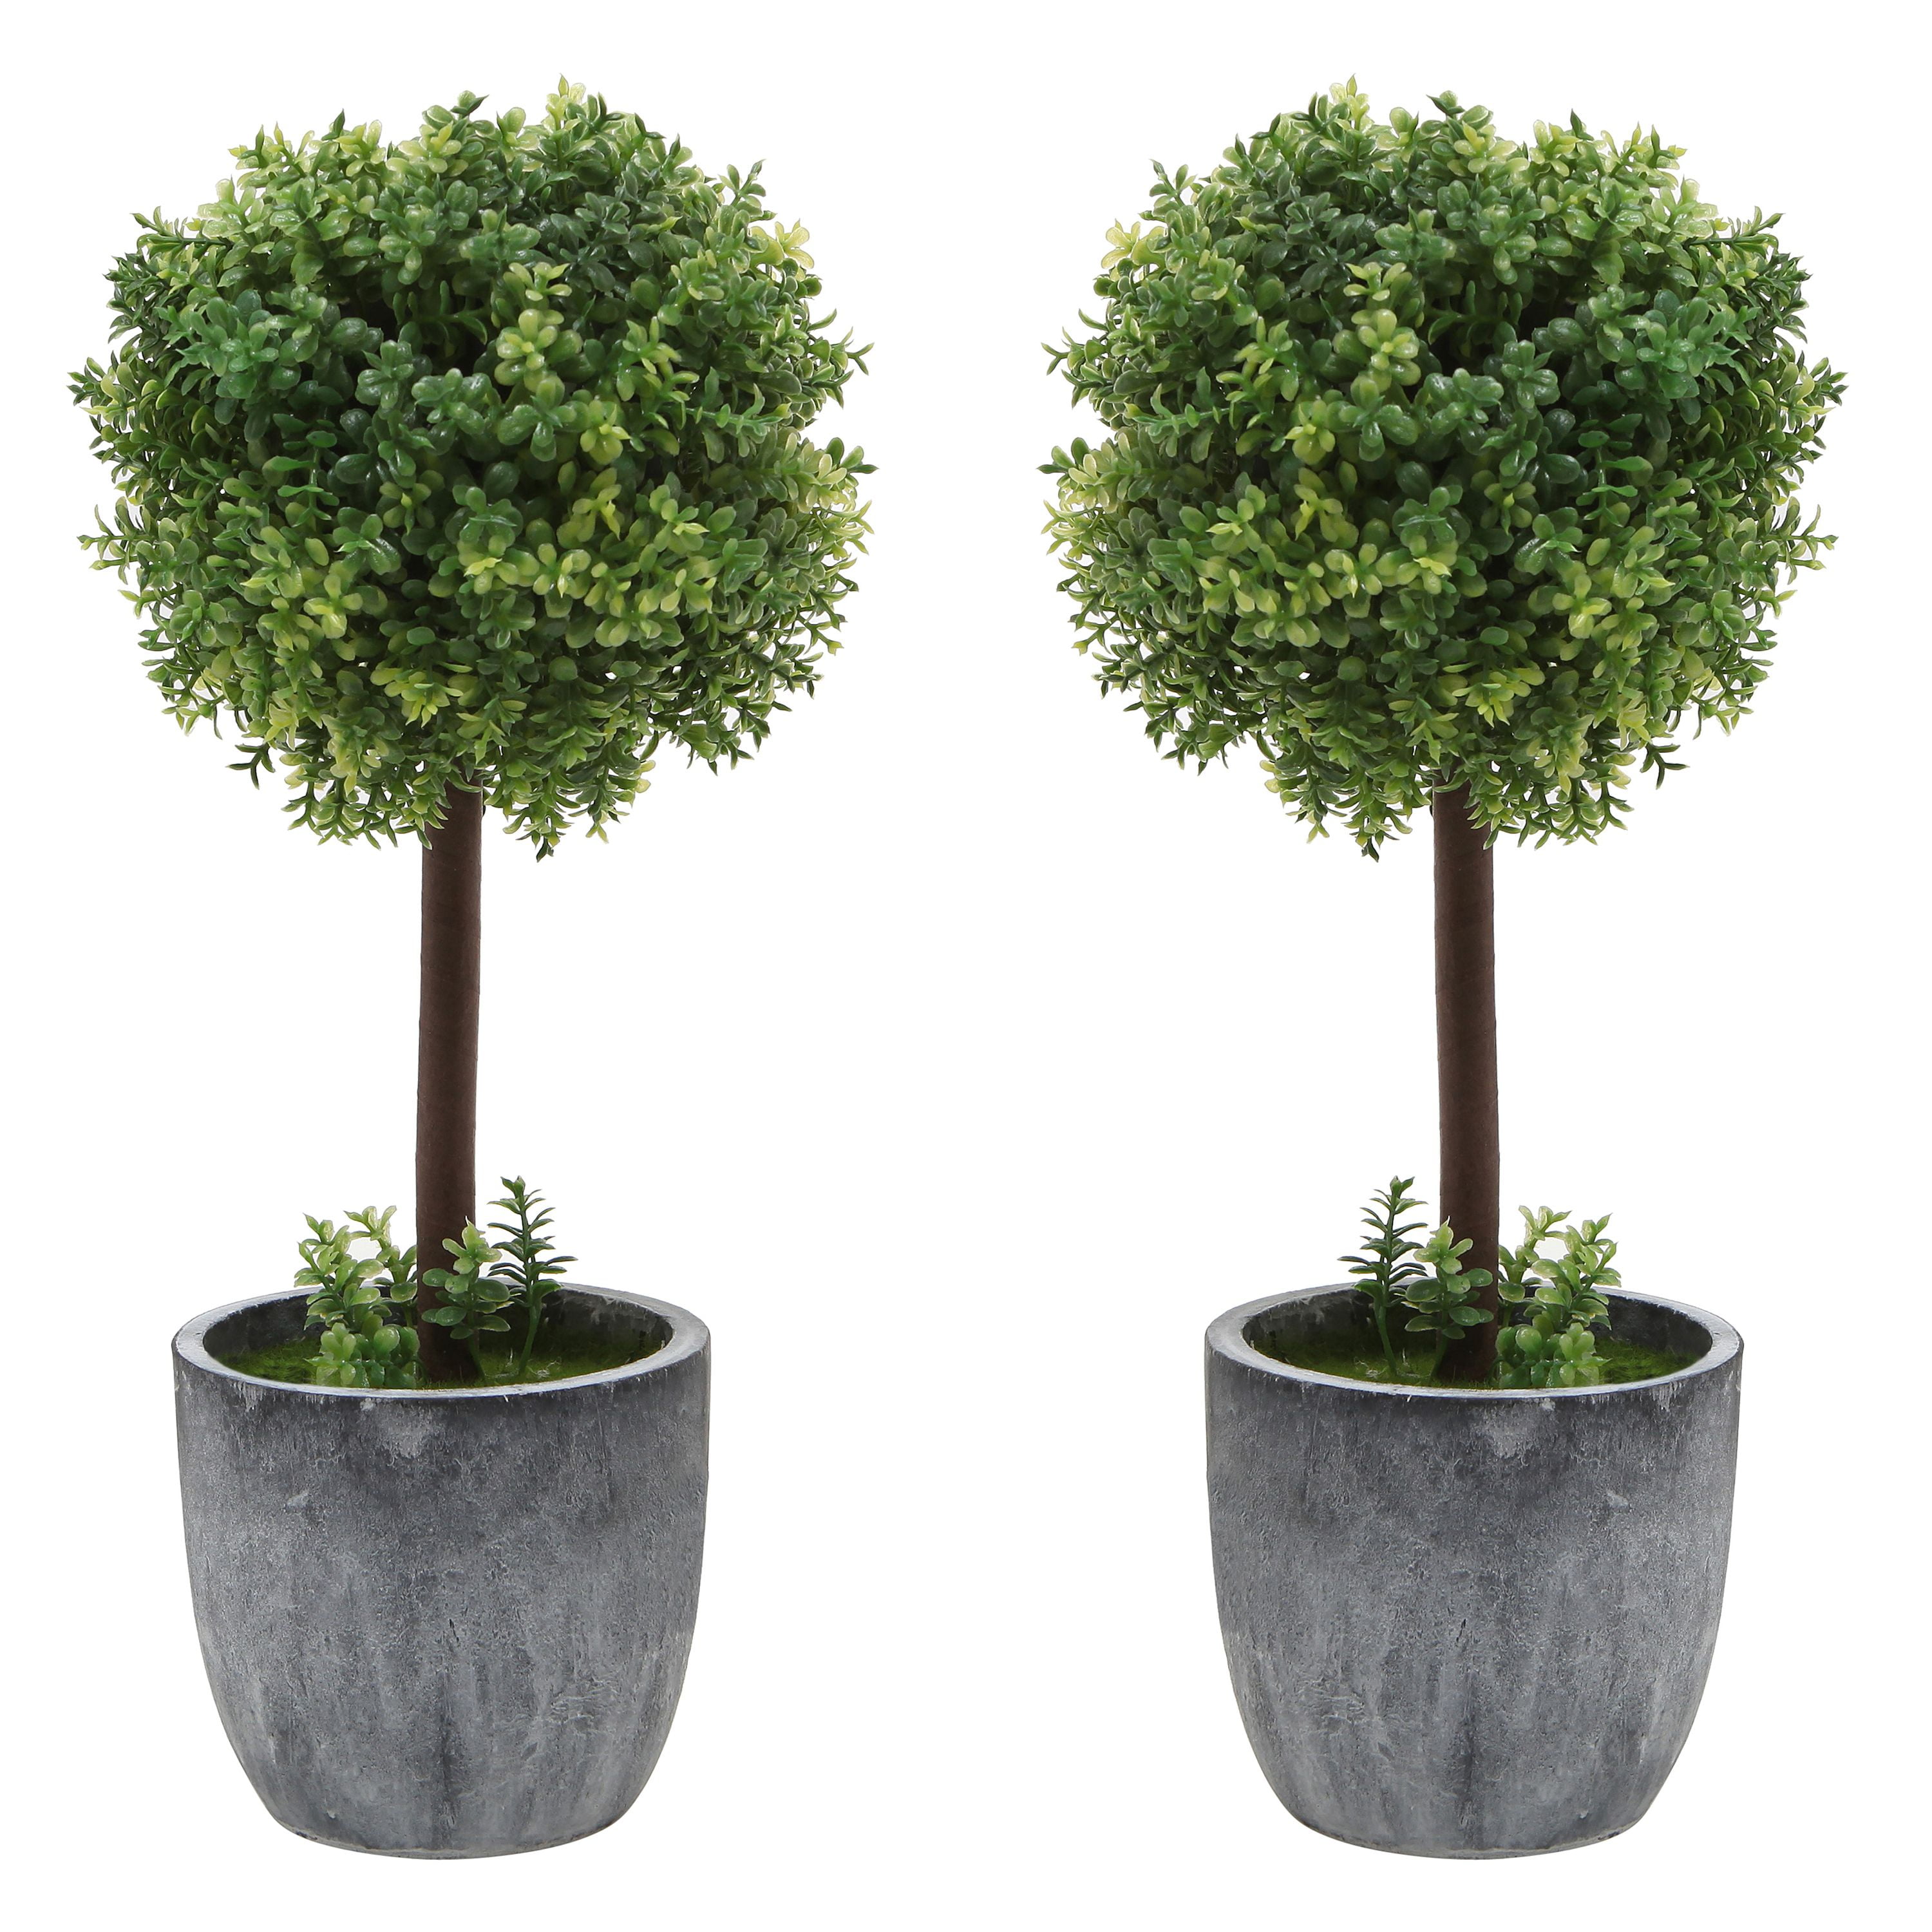 Artificial topiary trees outdoor